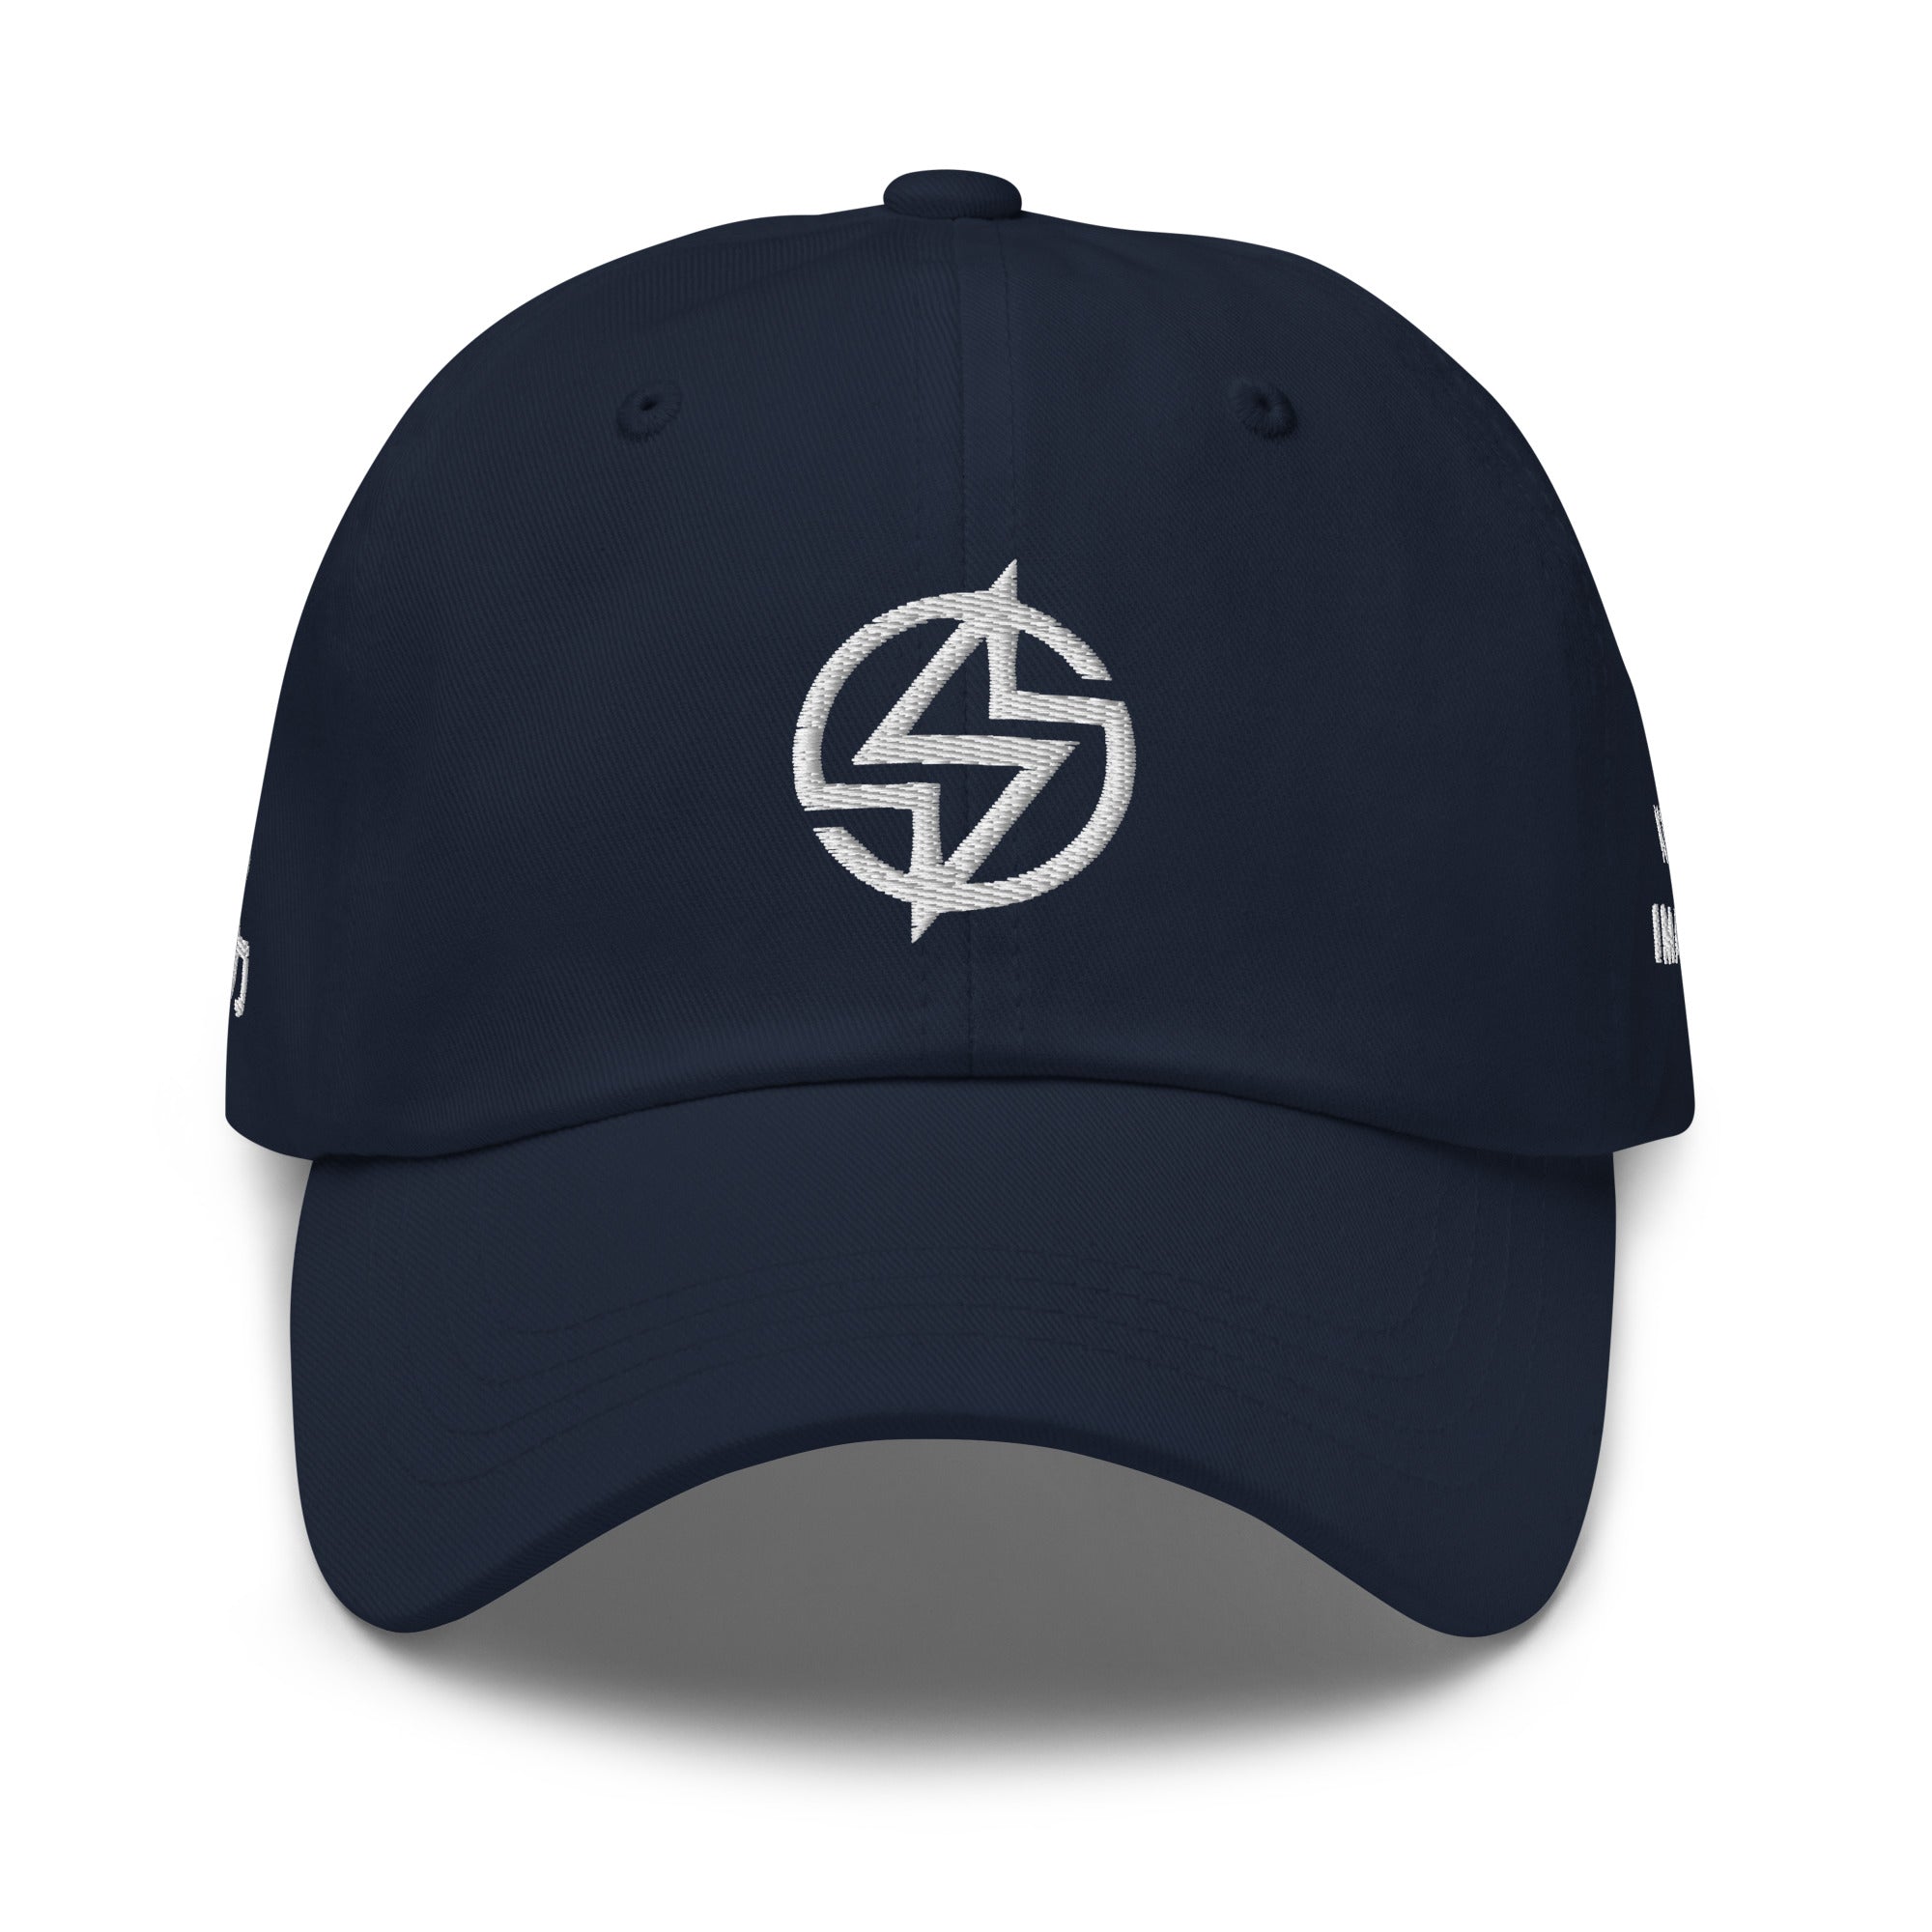 Navy dad hat with white embroidery